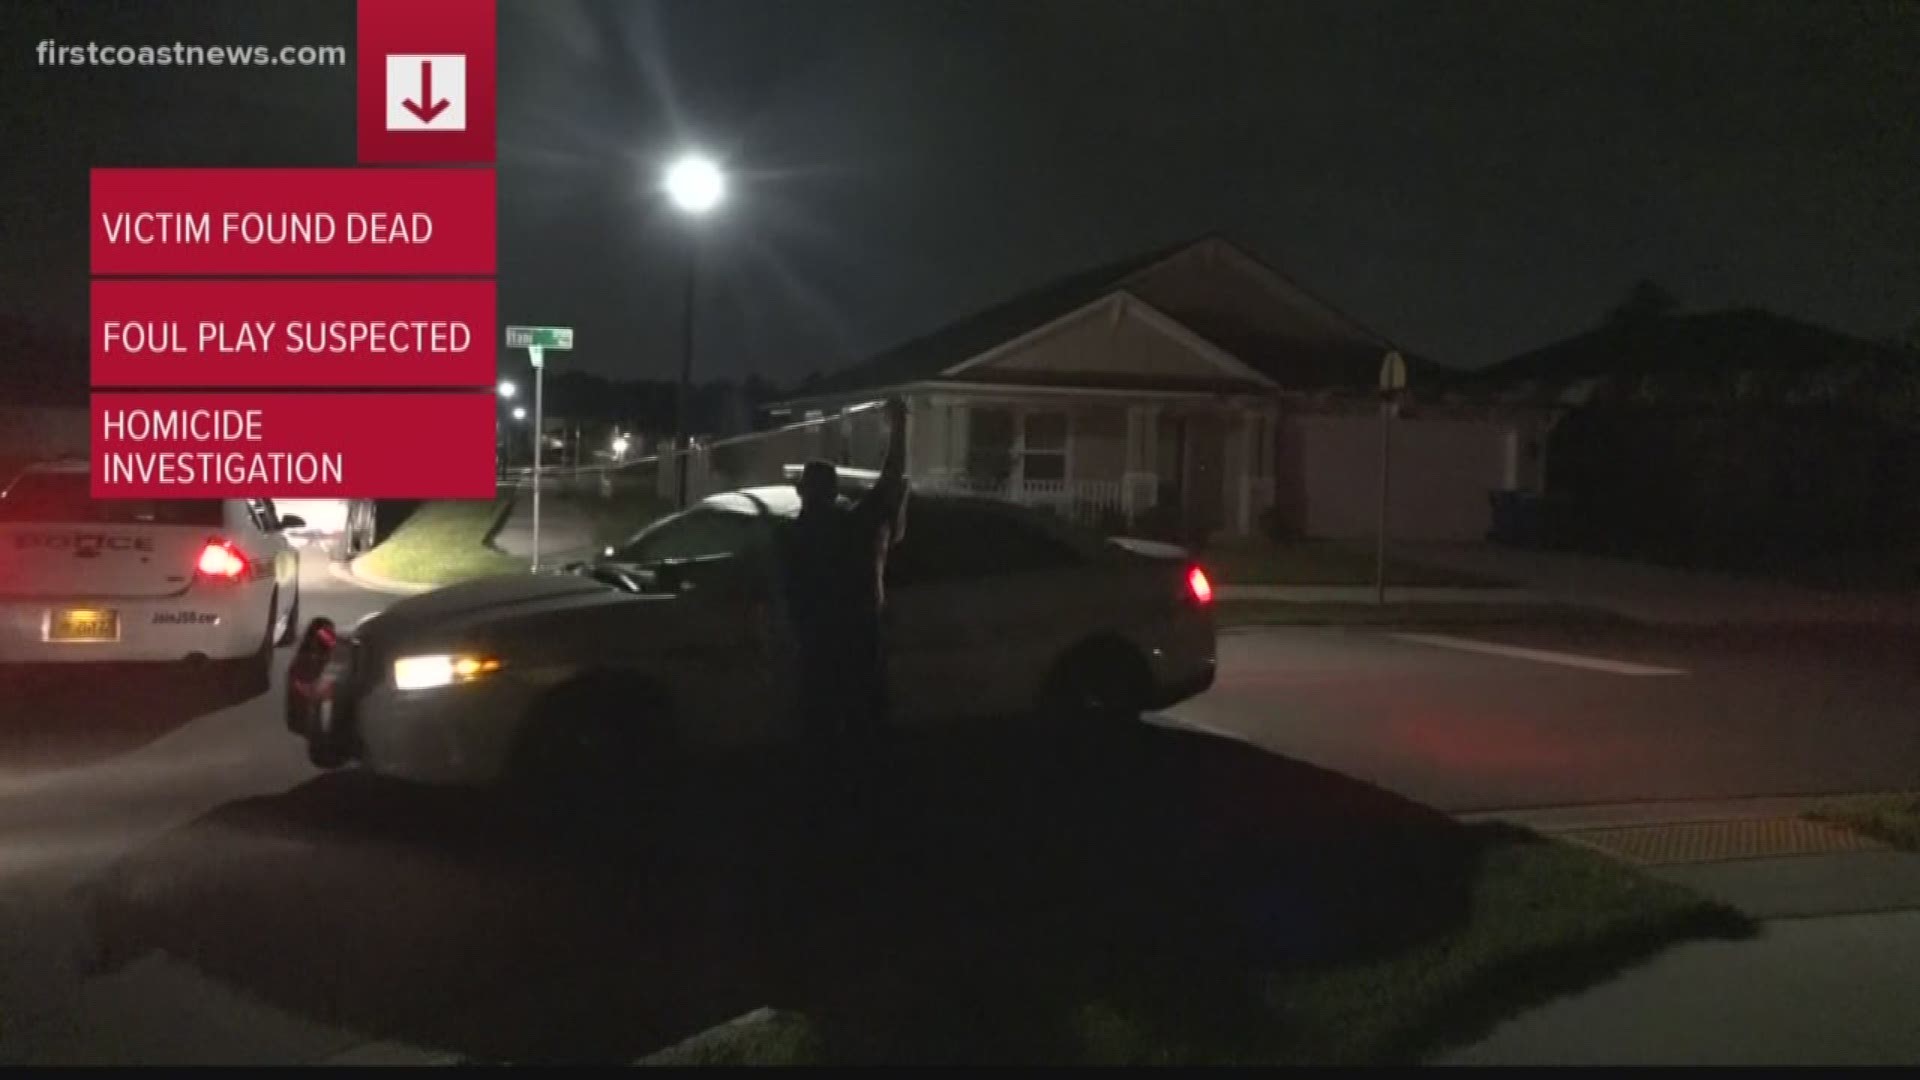 JSO said they received a call about a medical emergency in the 12500 block of Itani Way around 12:13 a.m. When police arrived, they found the victim dead at the home.